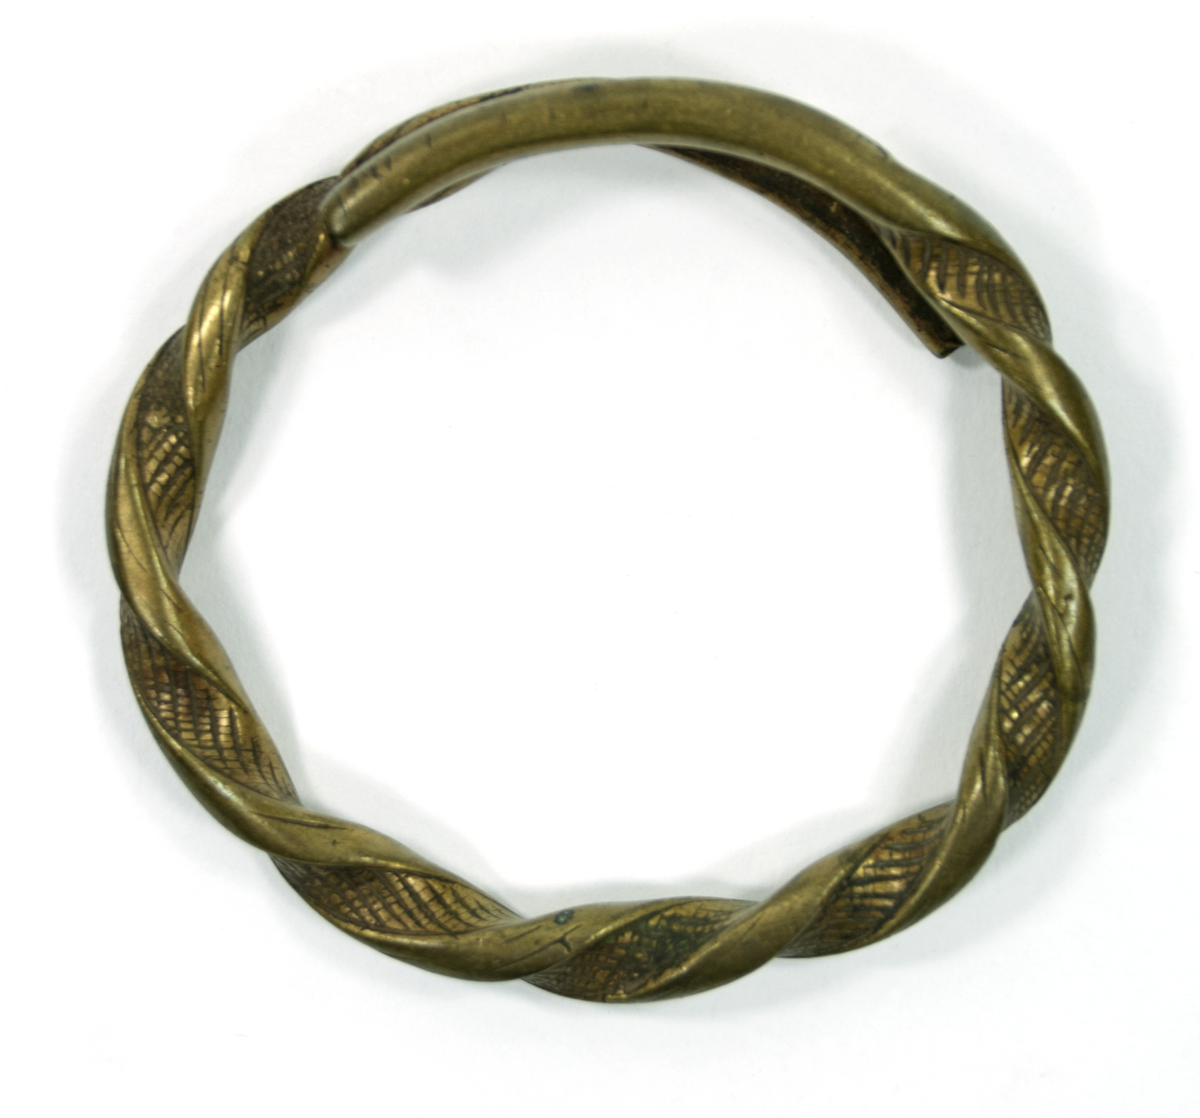 Bracelet of wrought brass, twisted with incision motifs, with ends overlapping.